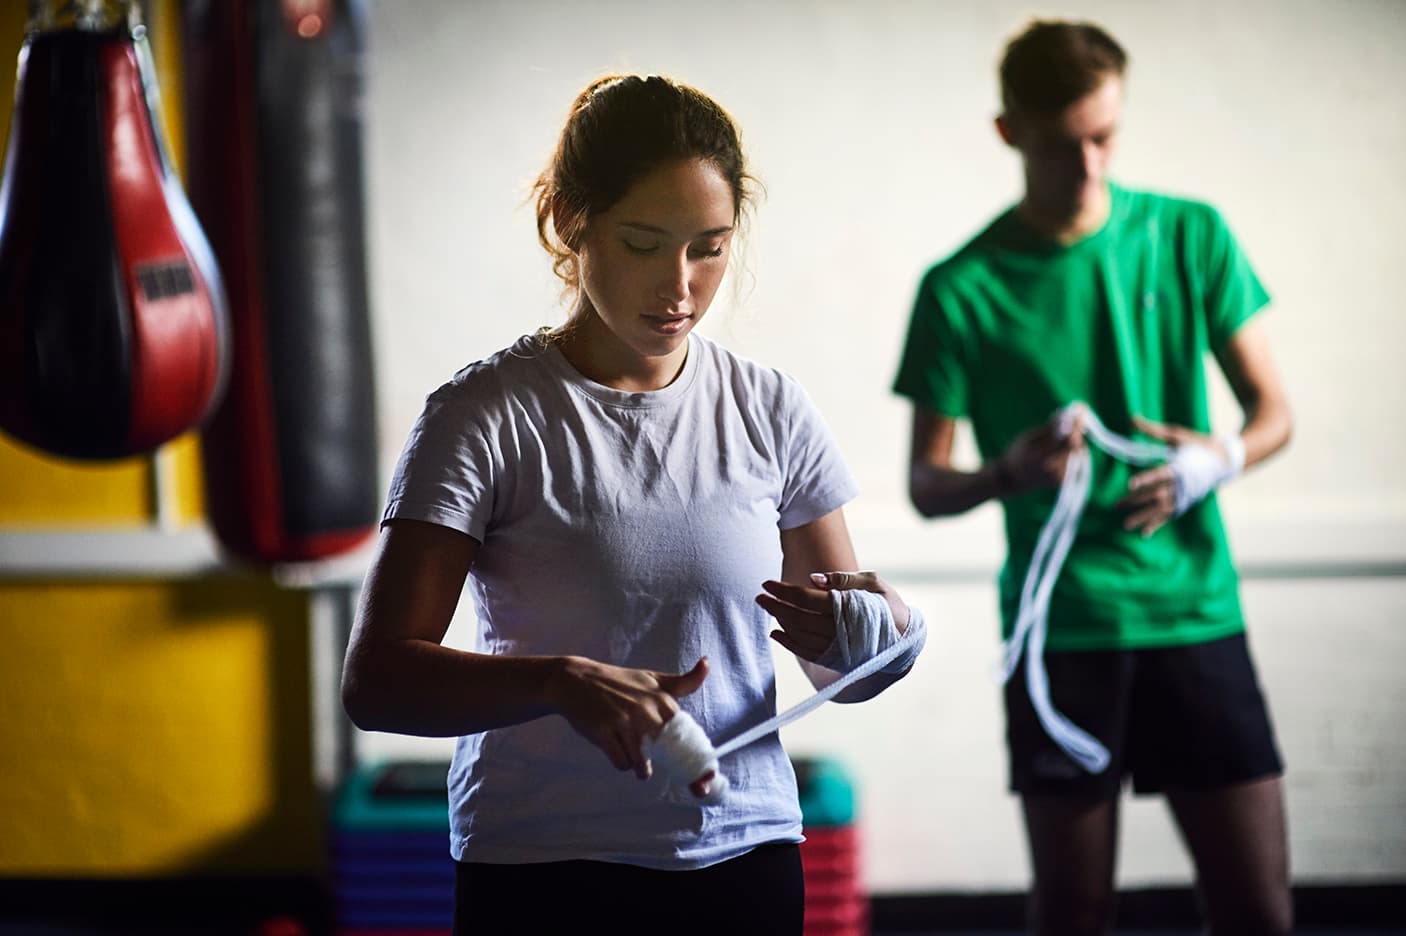 A women and man preparing their hands for boxing in a boxing gym with boxing bags in the background